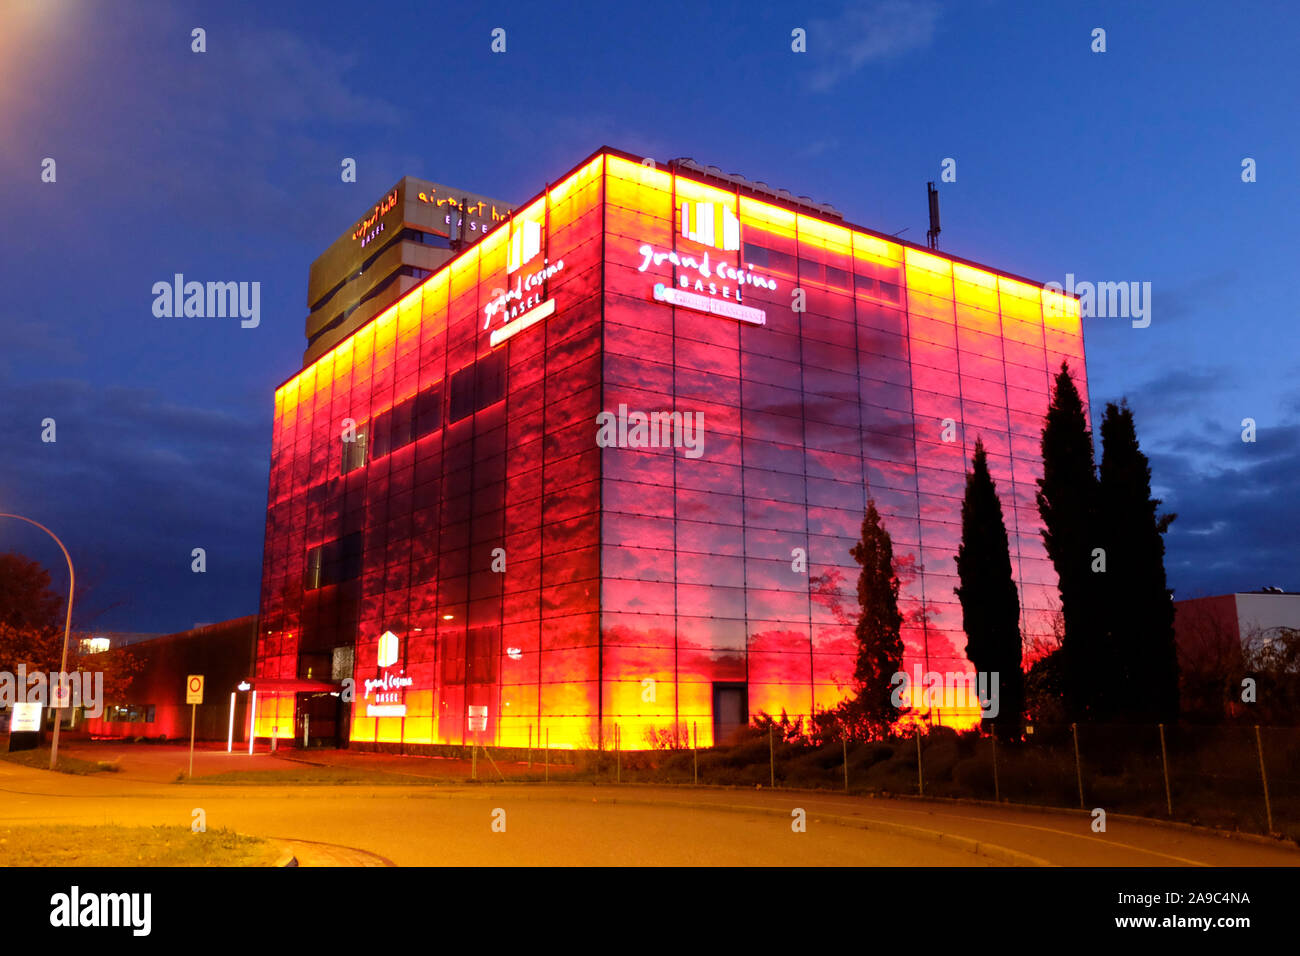 A general view of the grand casino Basel at night Stock Photo